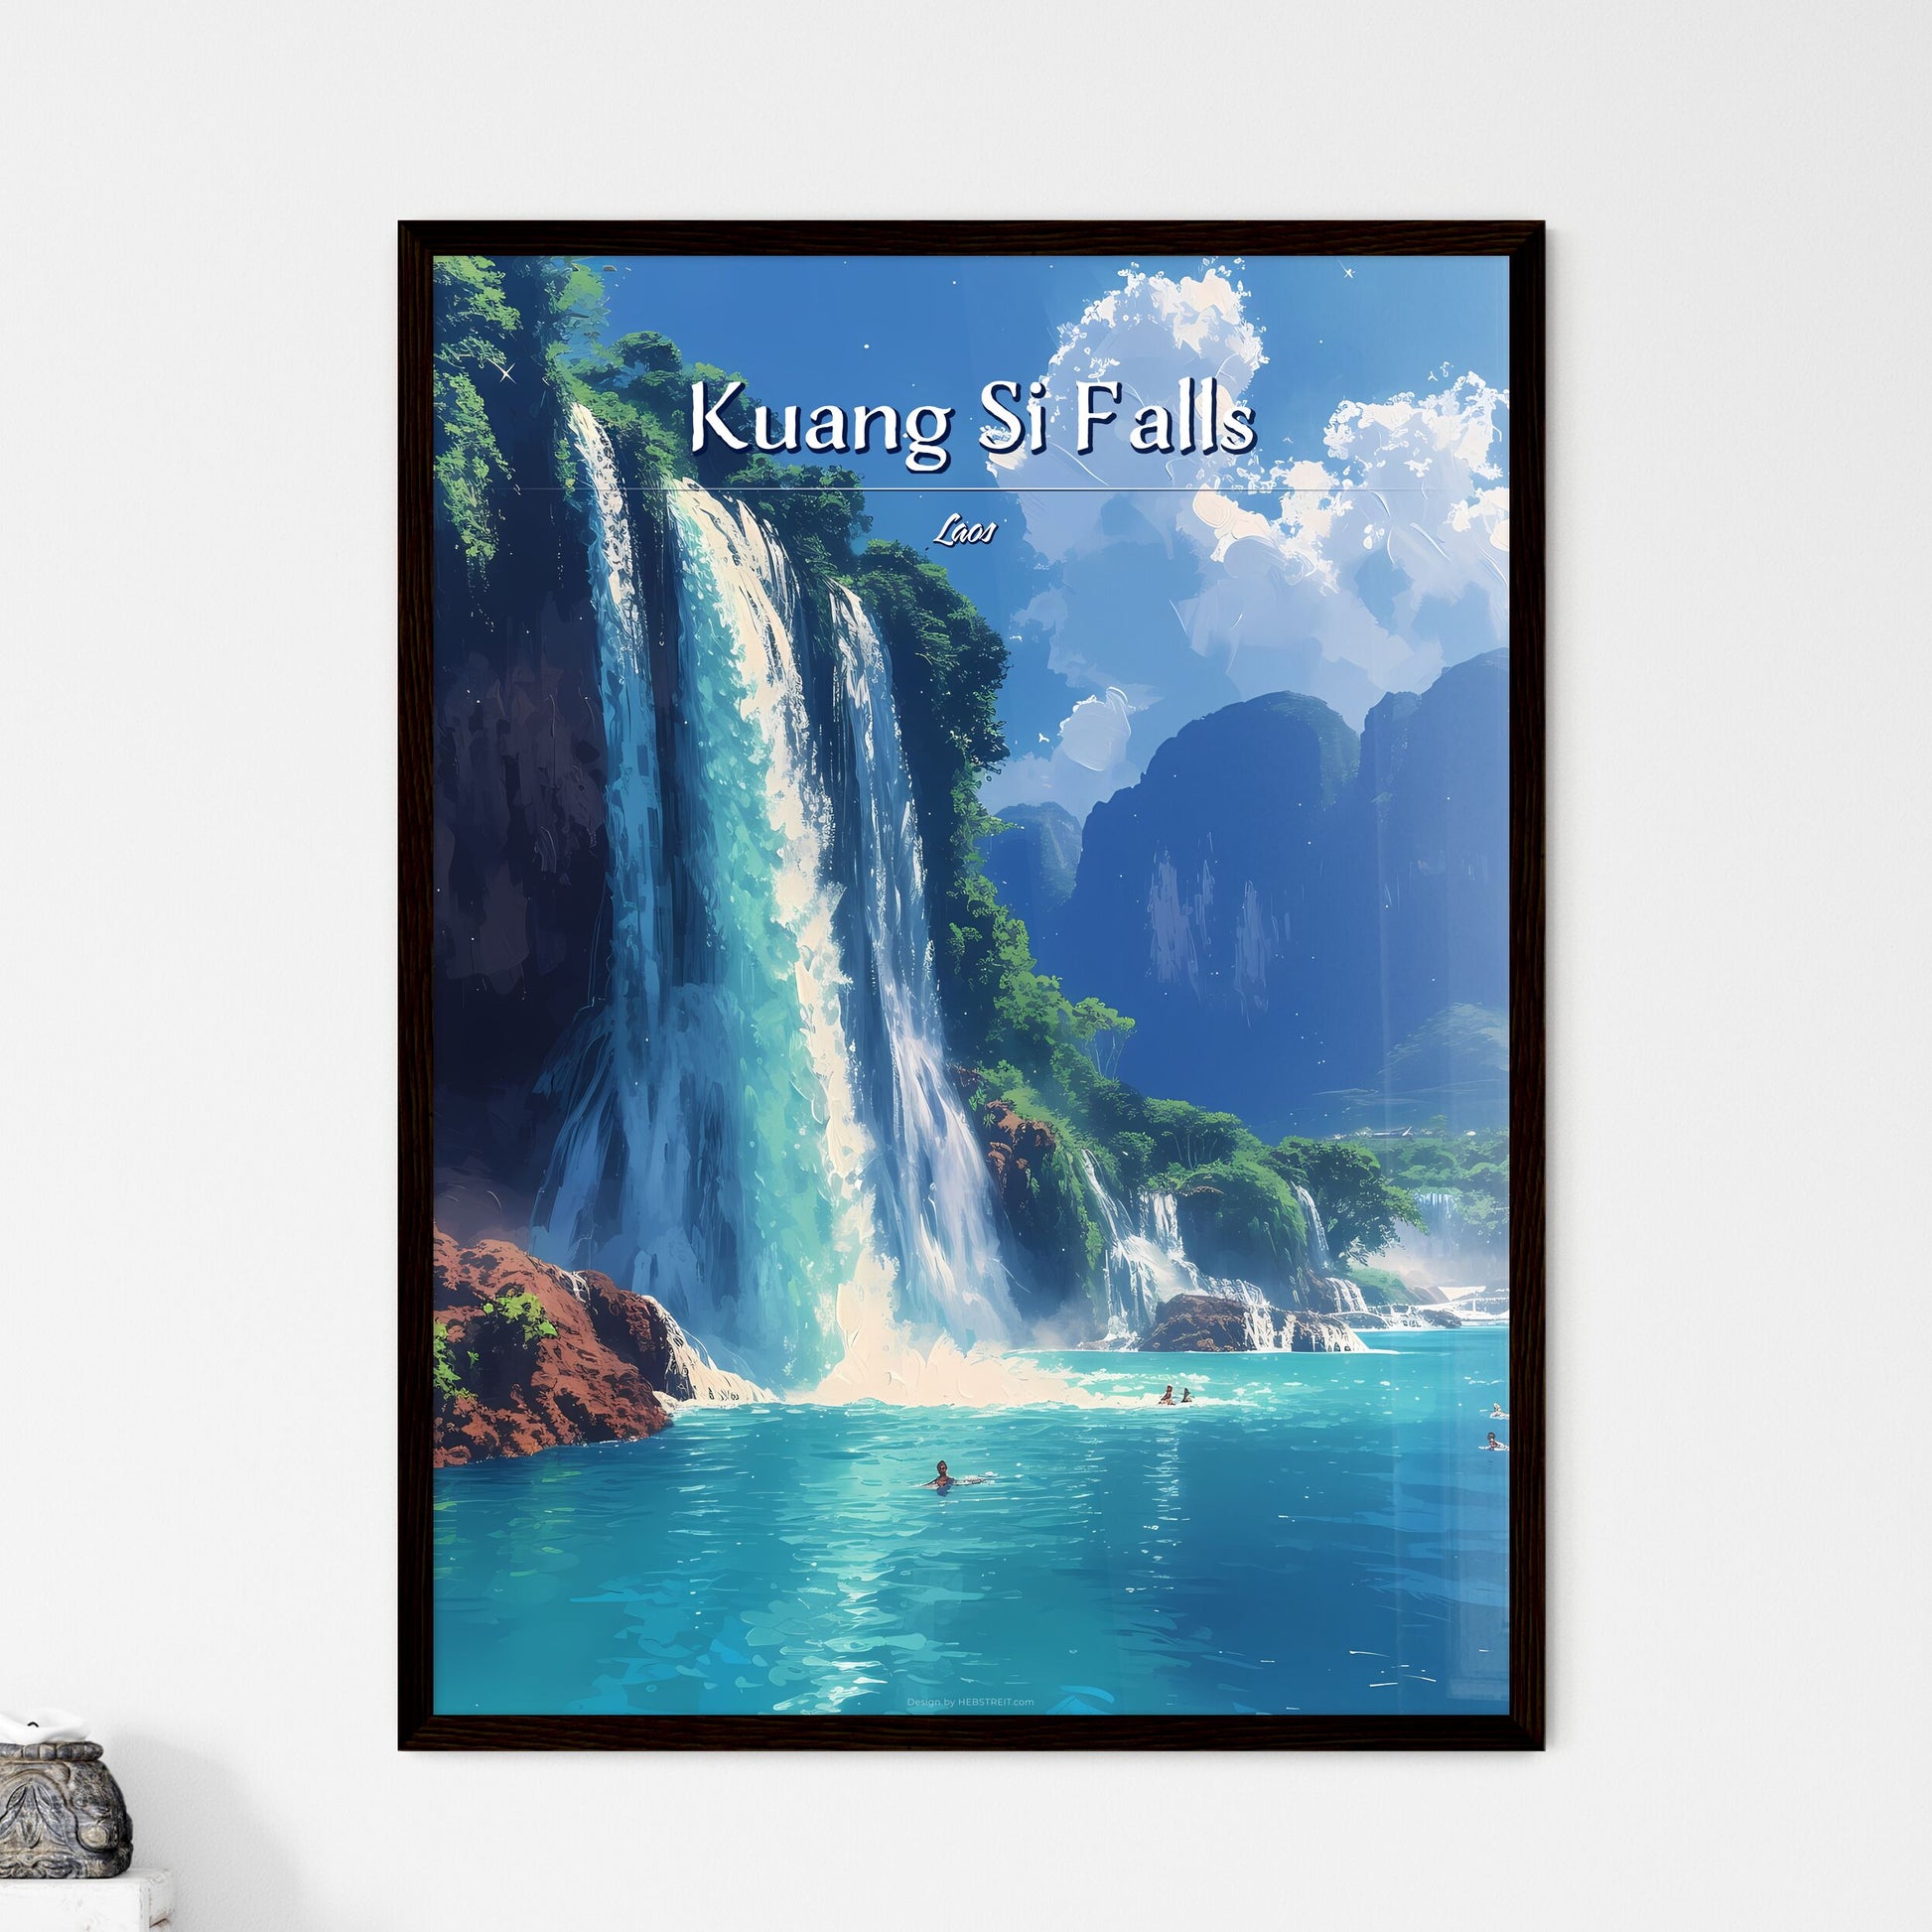 Kuang Si Falls, Laos - Art print of a waterfall in a body of water Default Title